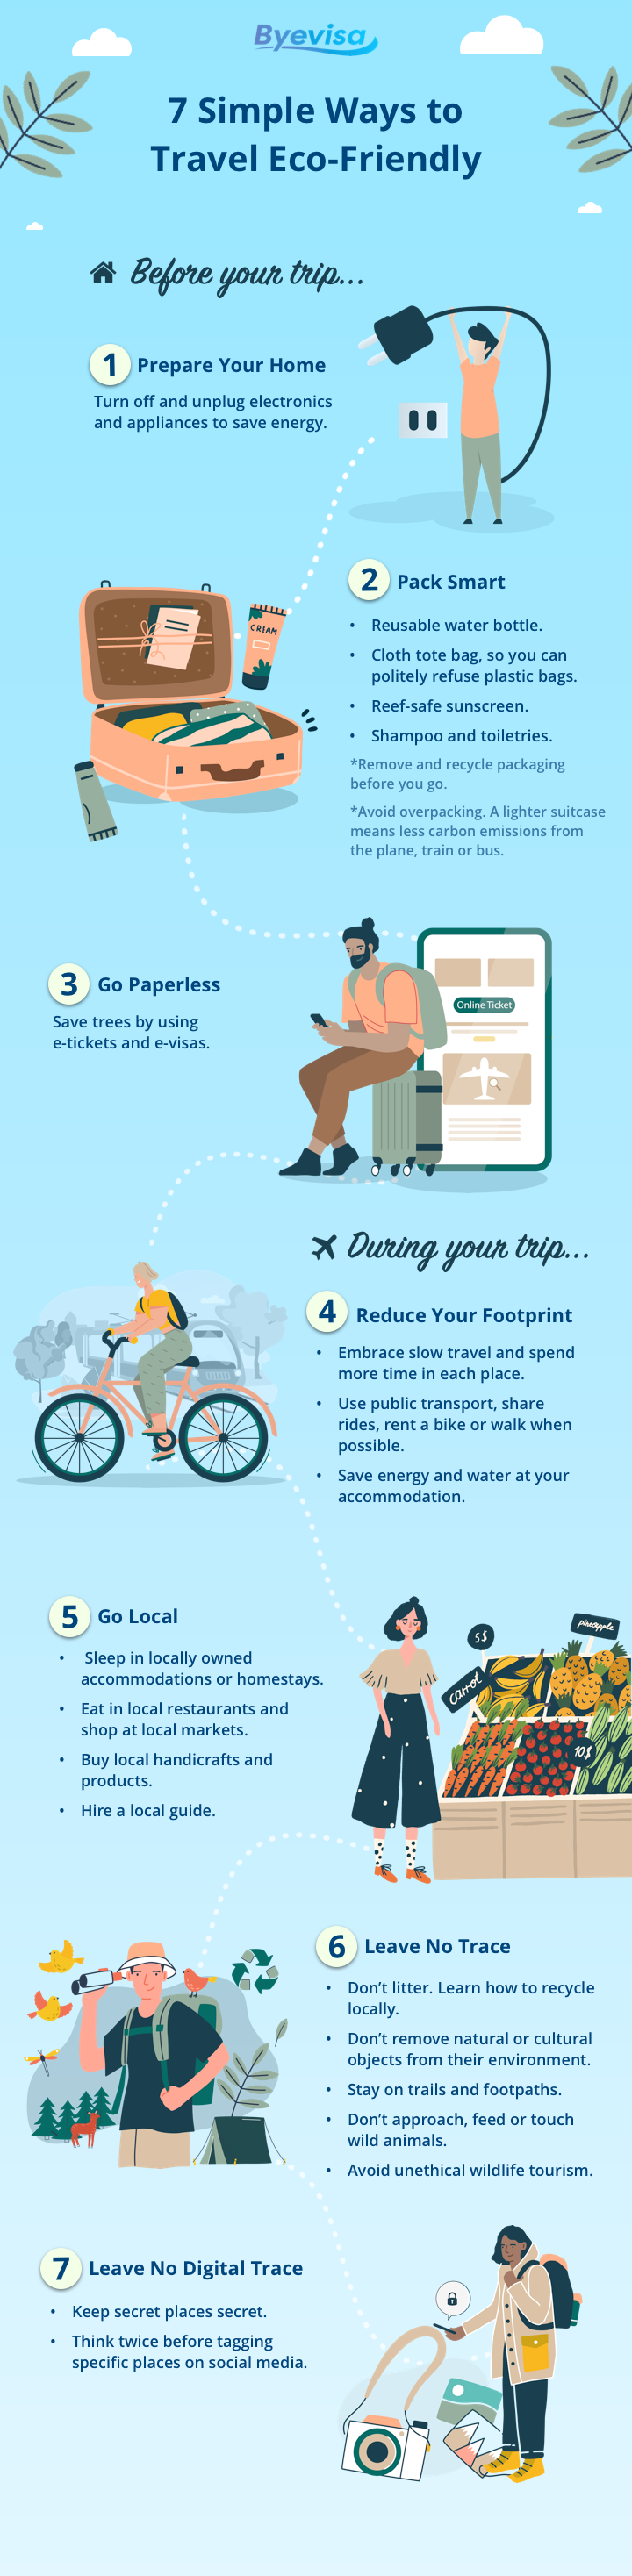 7 Simple Ways to Travel Eco-Friendly